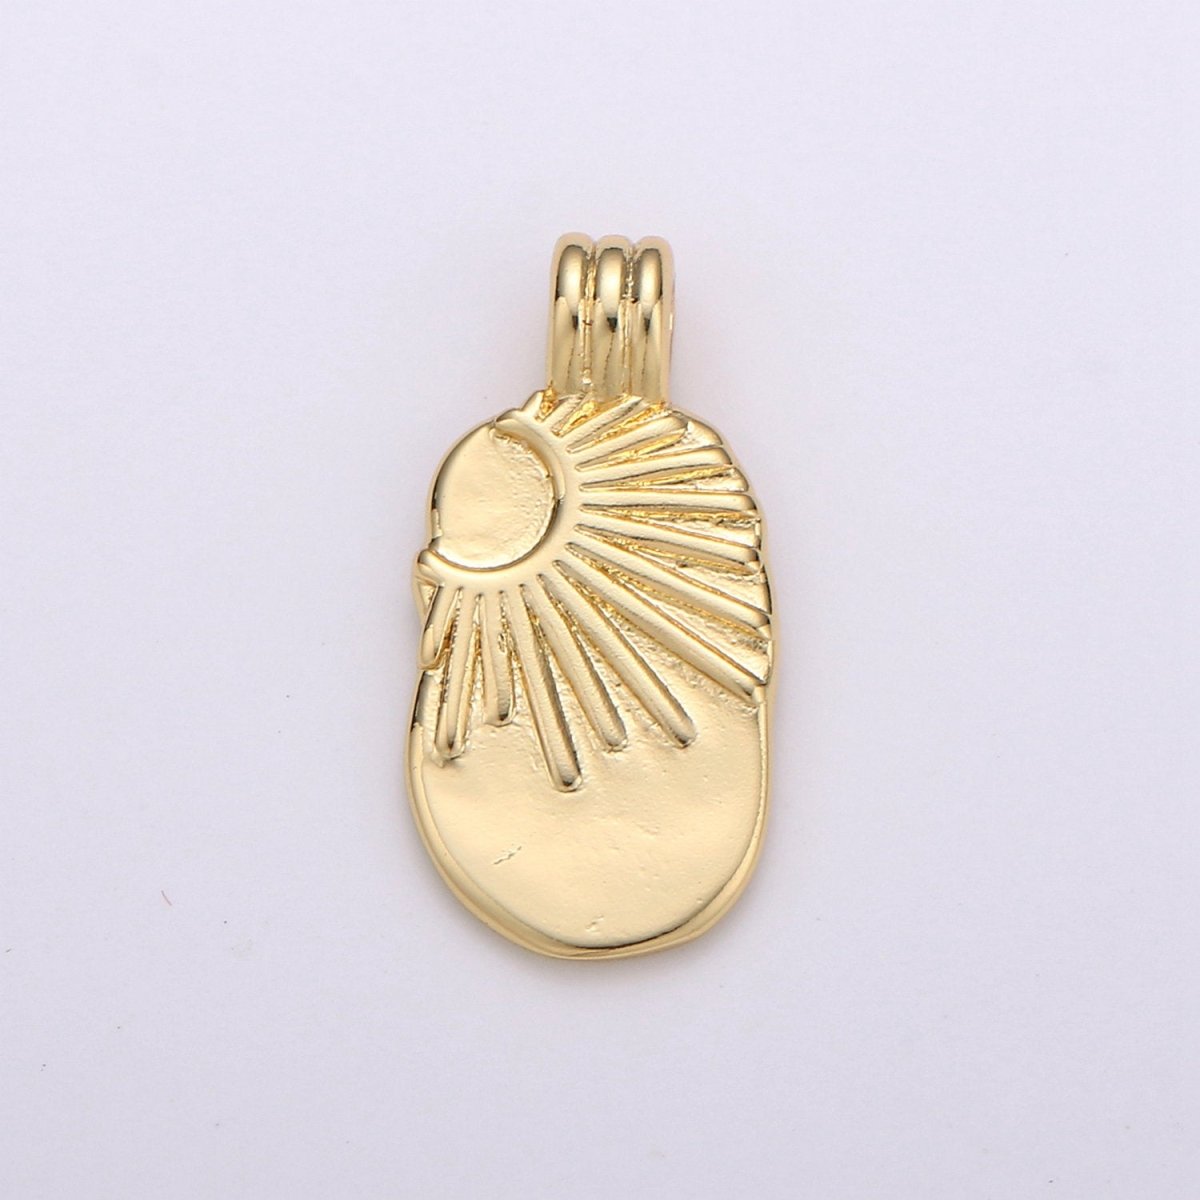 Dainty 14k Gold Filled Sunshine Charm - Gold Sun Charm, Sun with rays pendant, Celestial Jewelry for Necklace Component Supply I-781 - DLUXCA